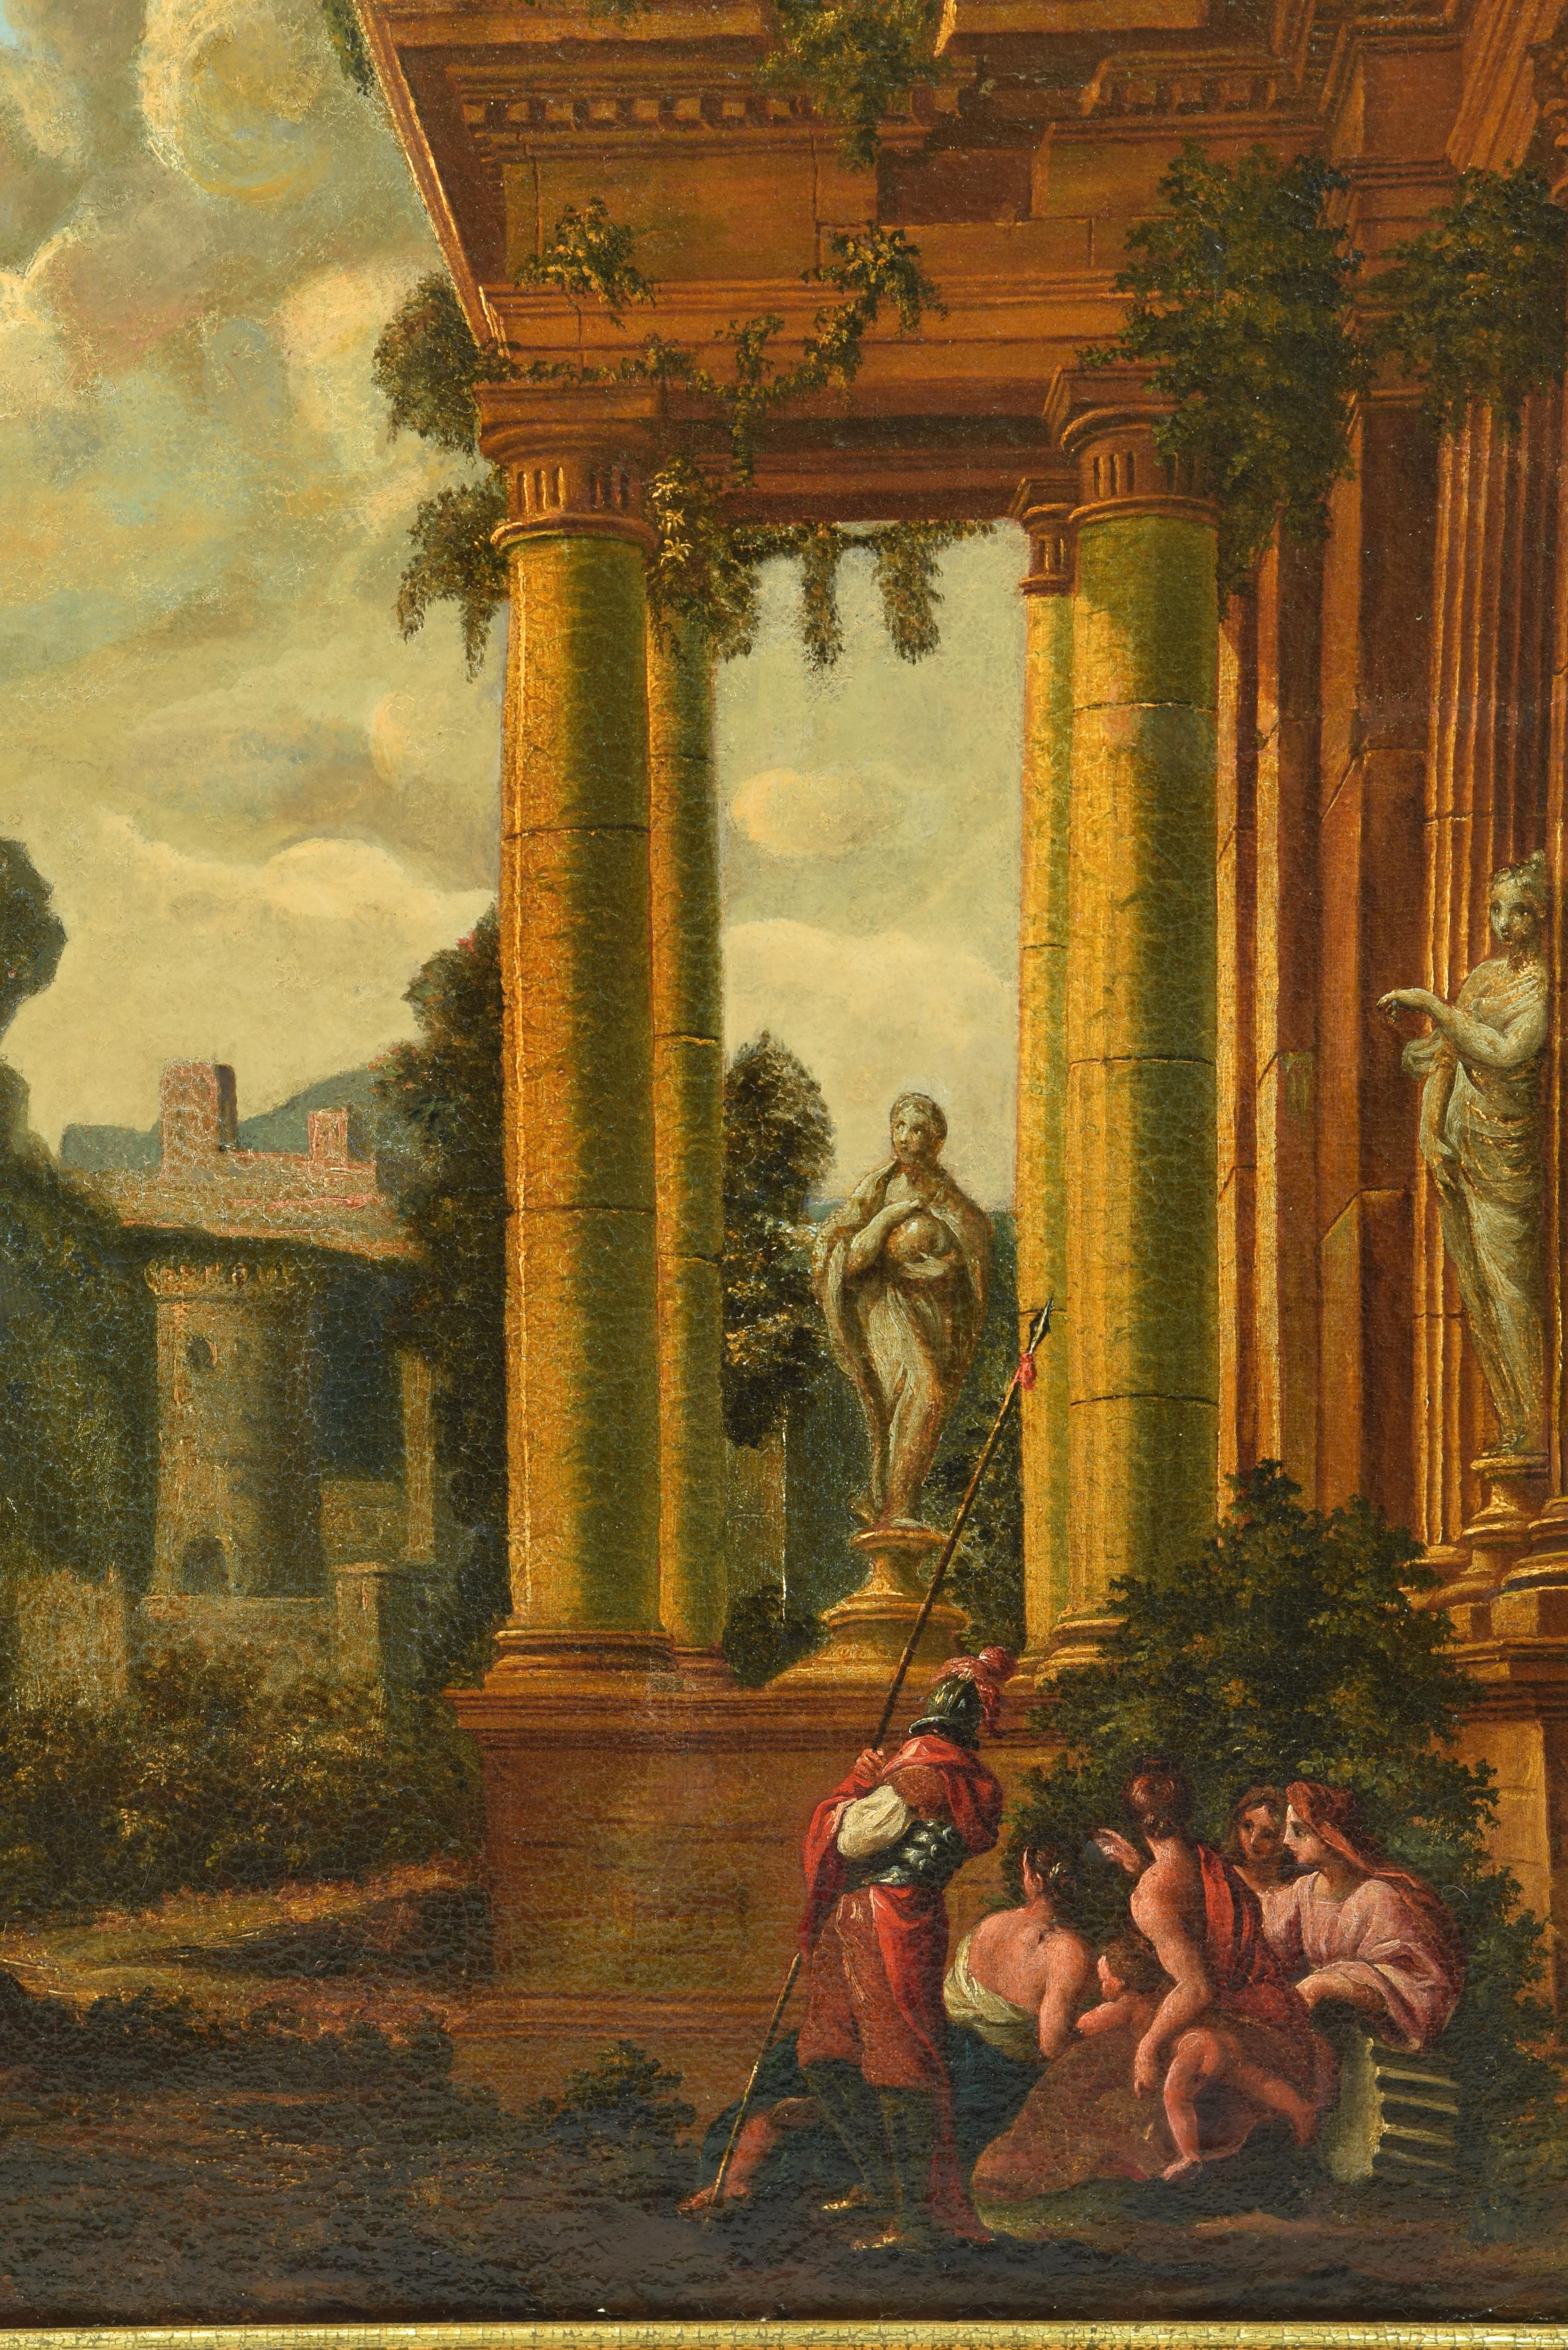 Landscape with classical ruins. Oil on canvas. Attributed to Giner, Vicente (ca. 1636-1681). 
Reengineered (reentelado in spanish).
Landscape with rocks and buildings in the background that presents, in the foreground, constructions with a marked